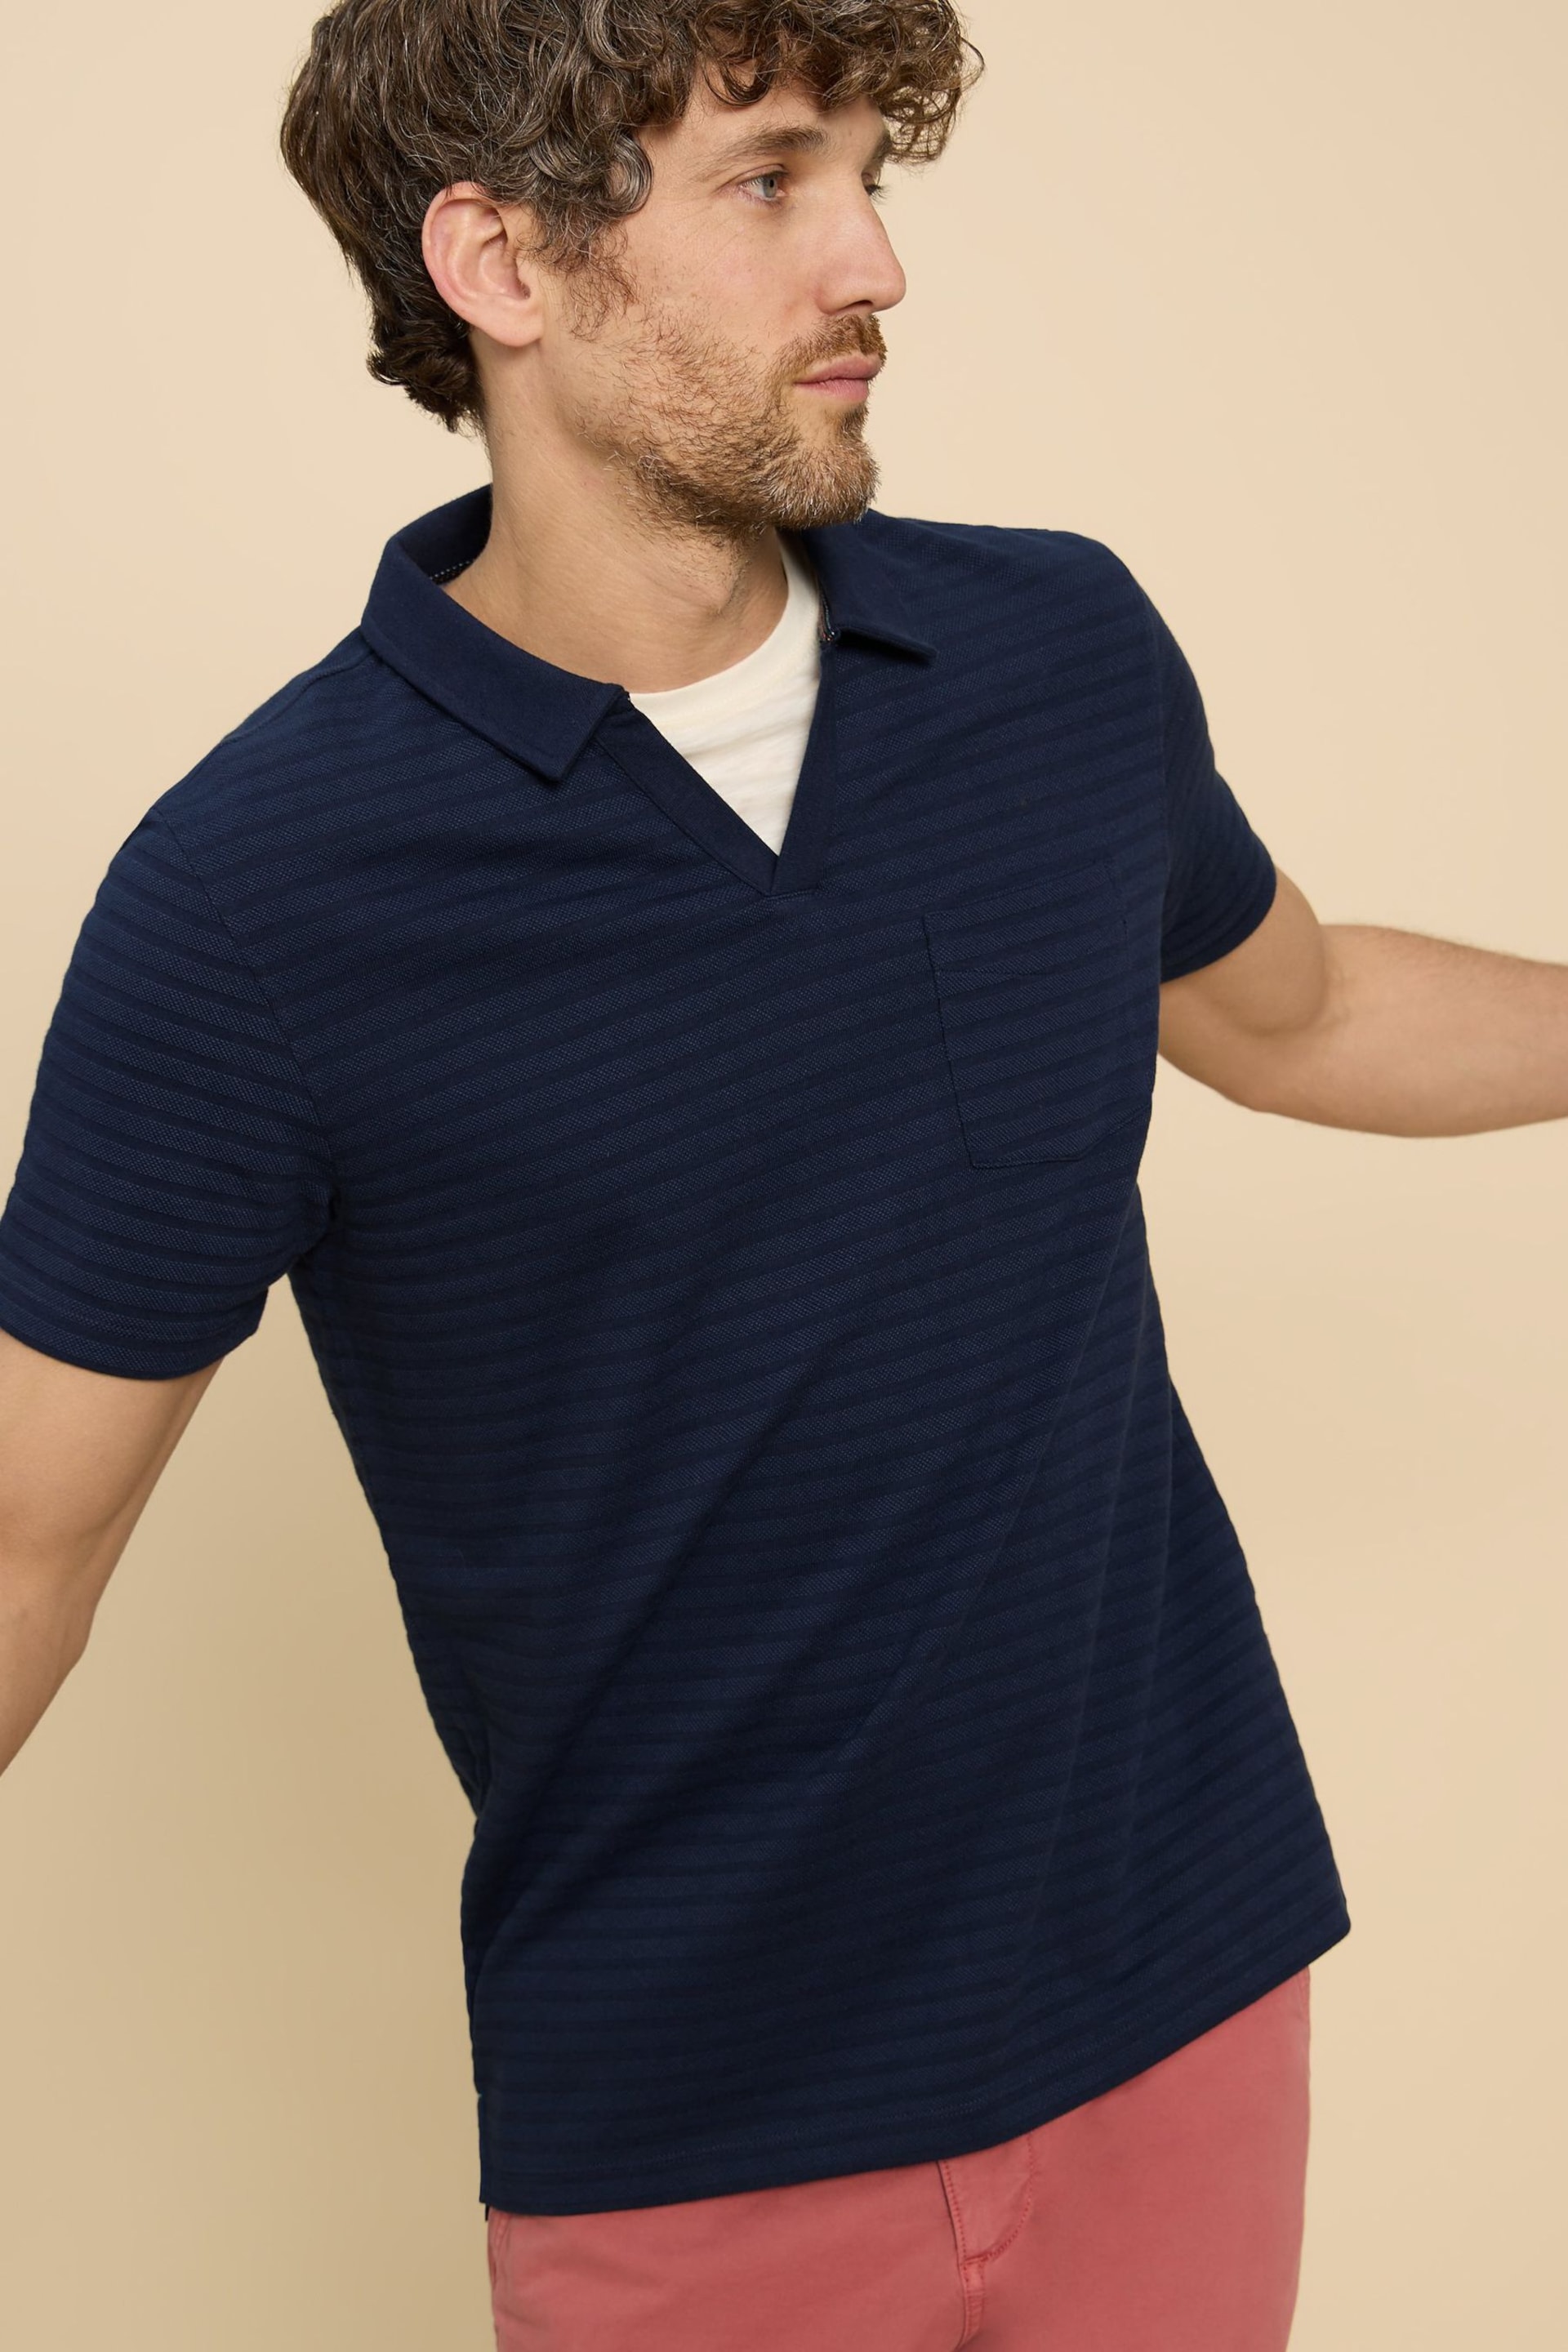 White Stuff Blue Textured Open Collar Polo Shirt - Image 1 of 7